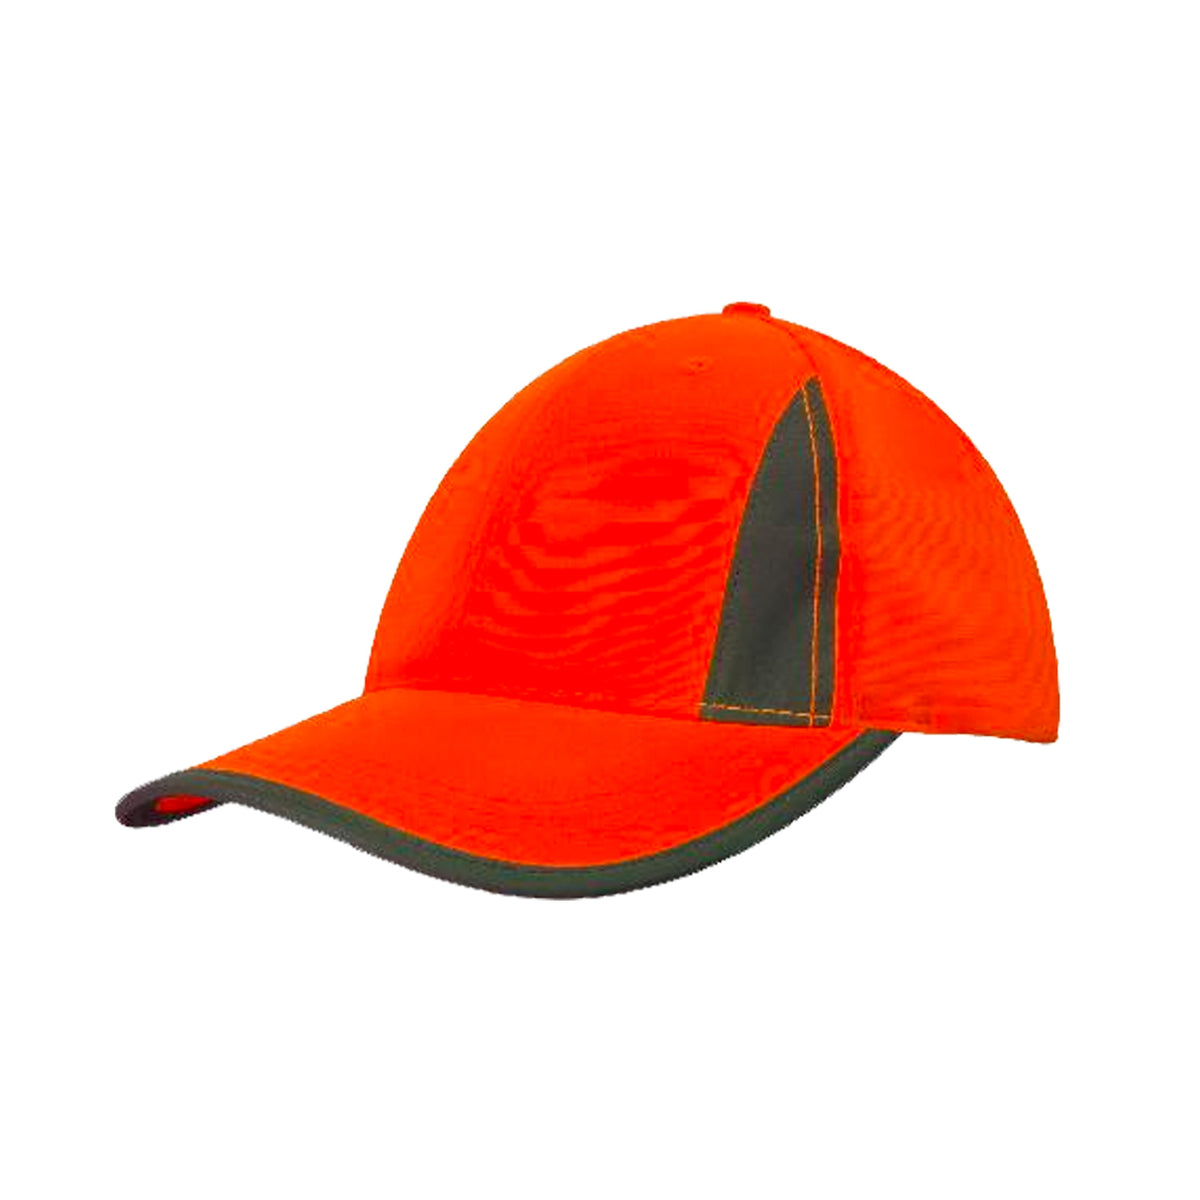 orange luminescent safety cap with reflective inserts and trim